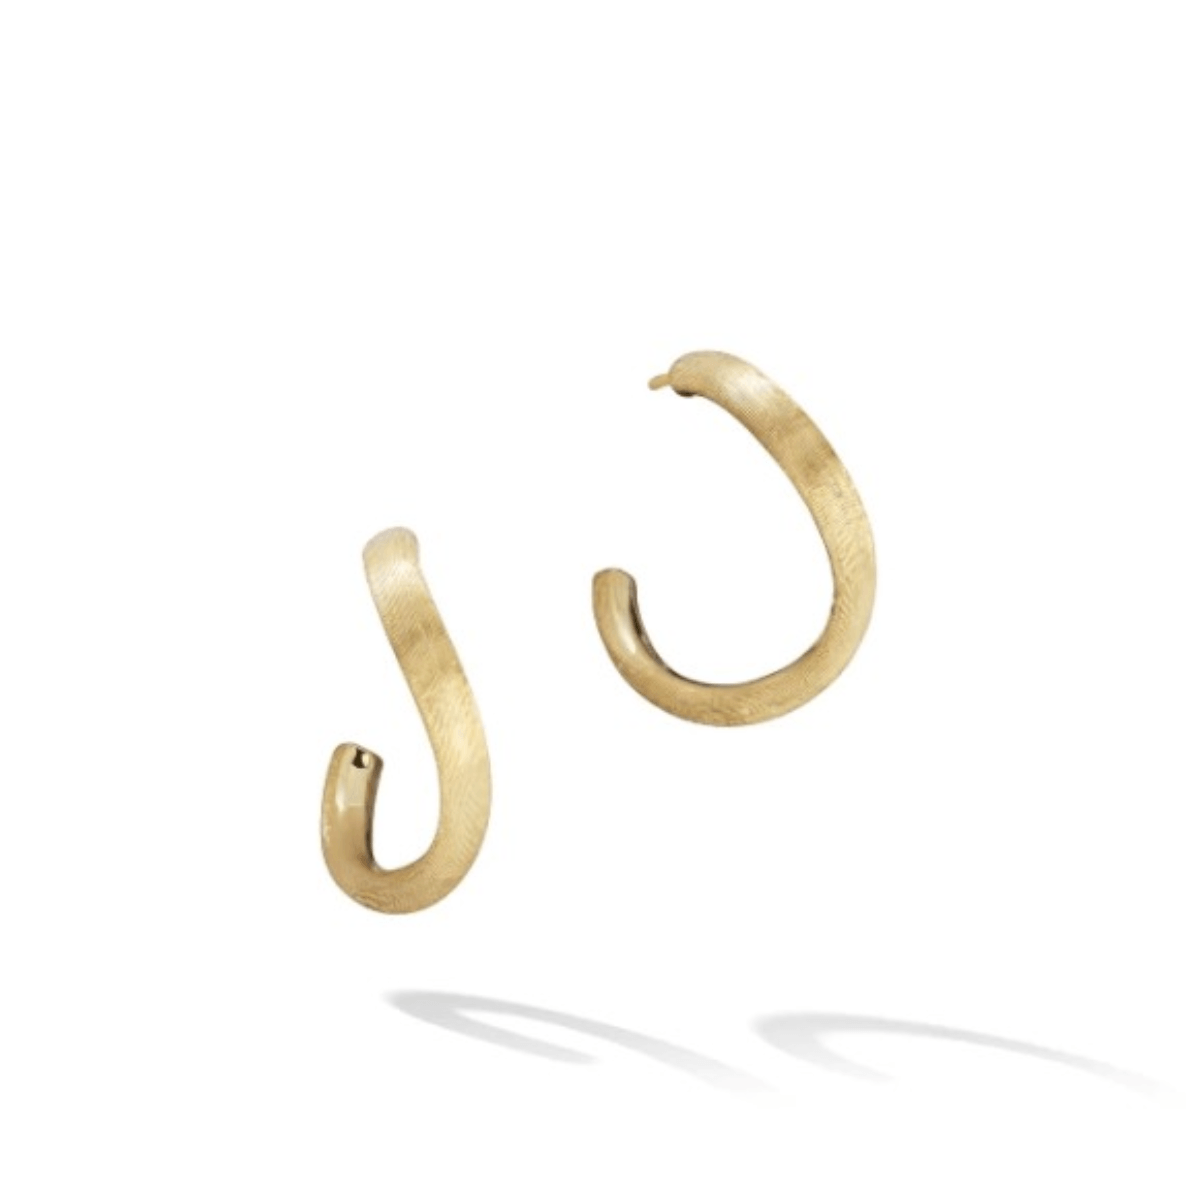 Marco Bicego Jaipur Collection 18K Yellow Gold Petite Hoop Earrings 0